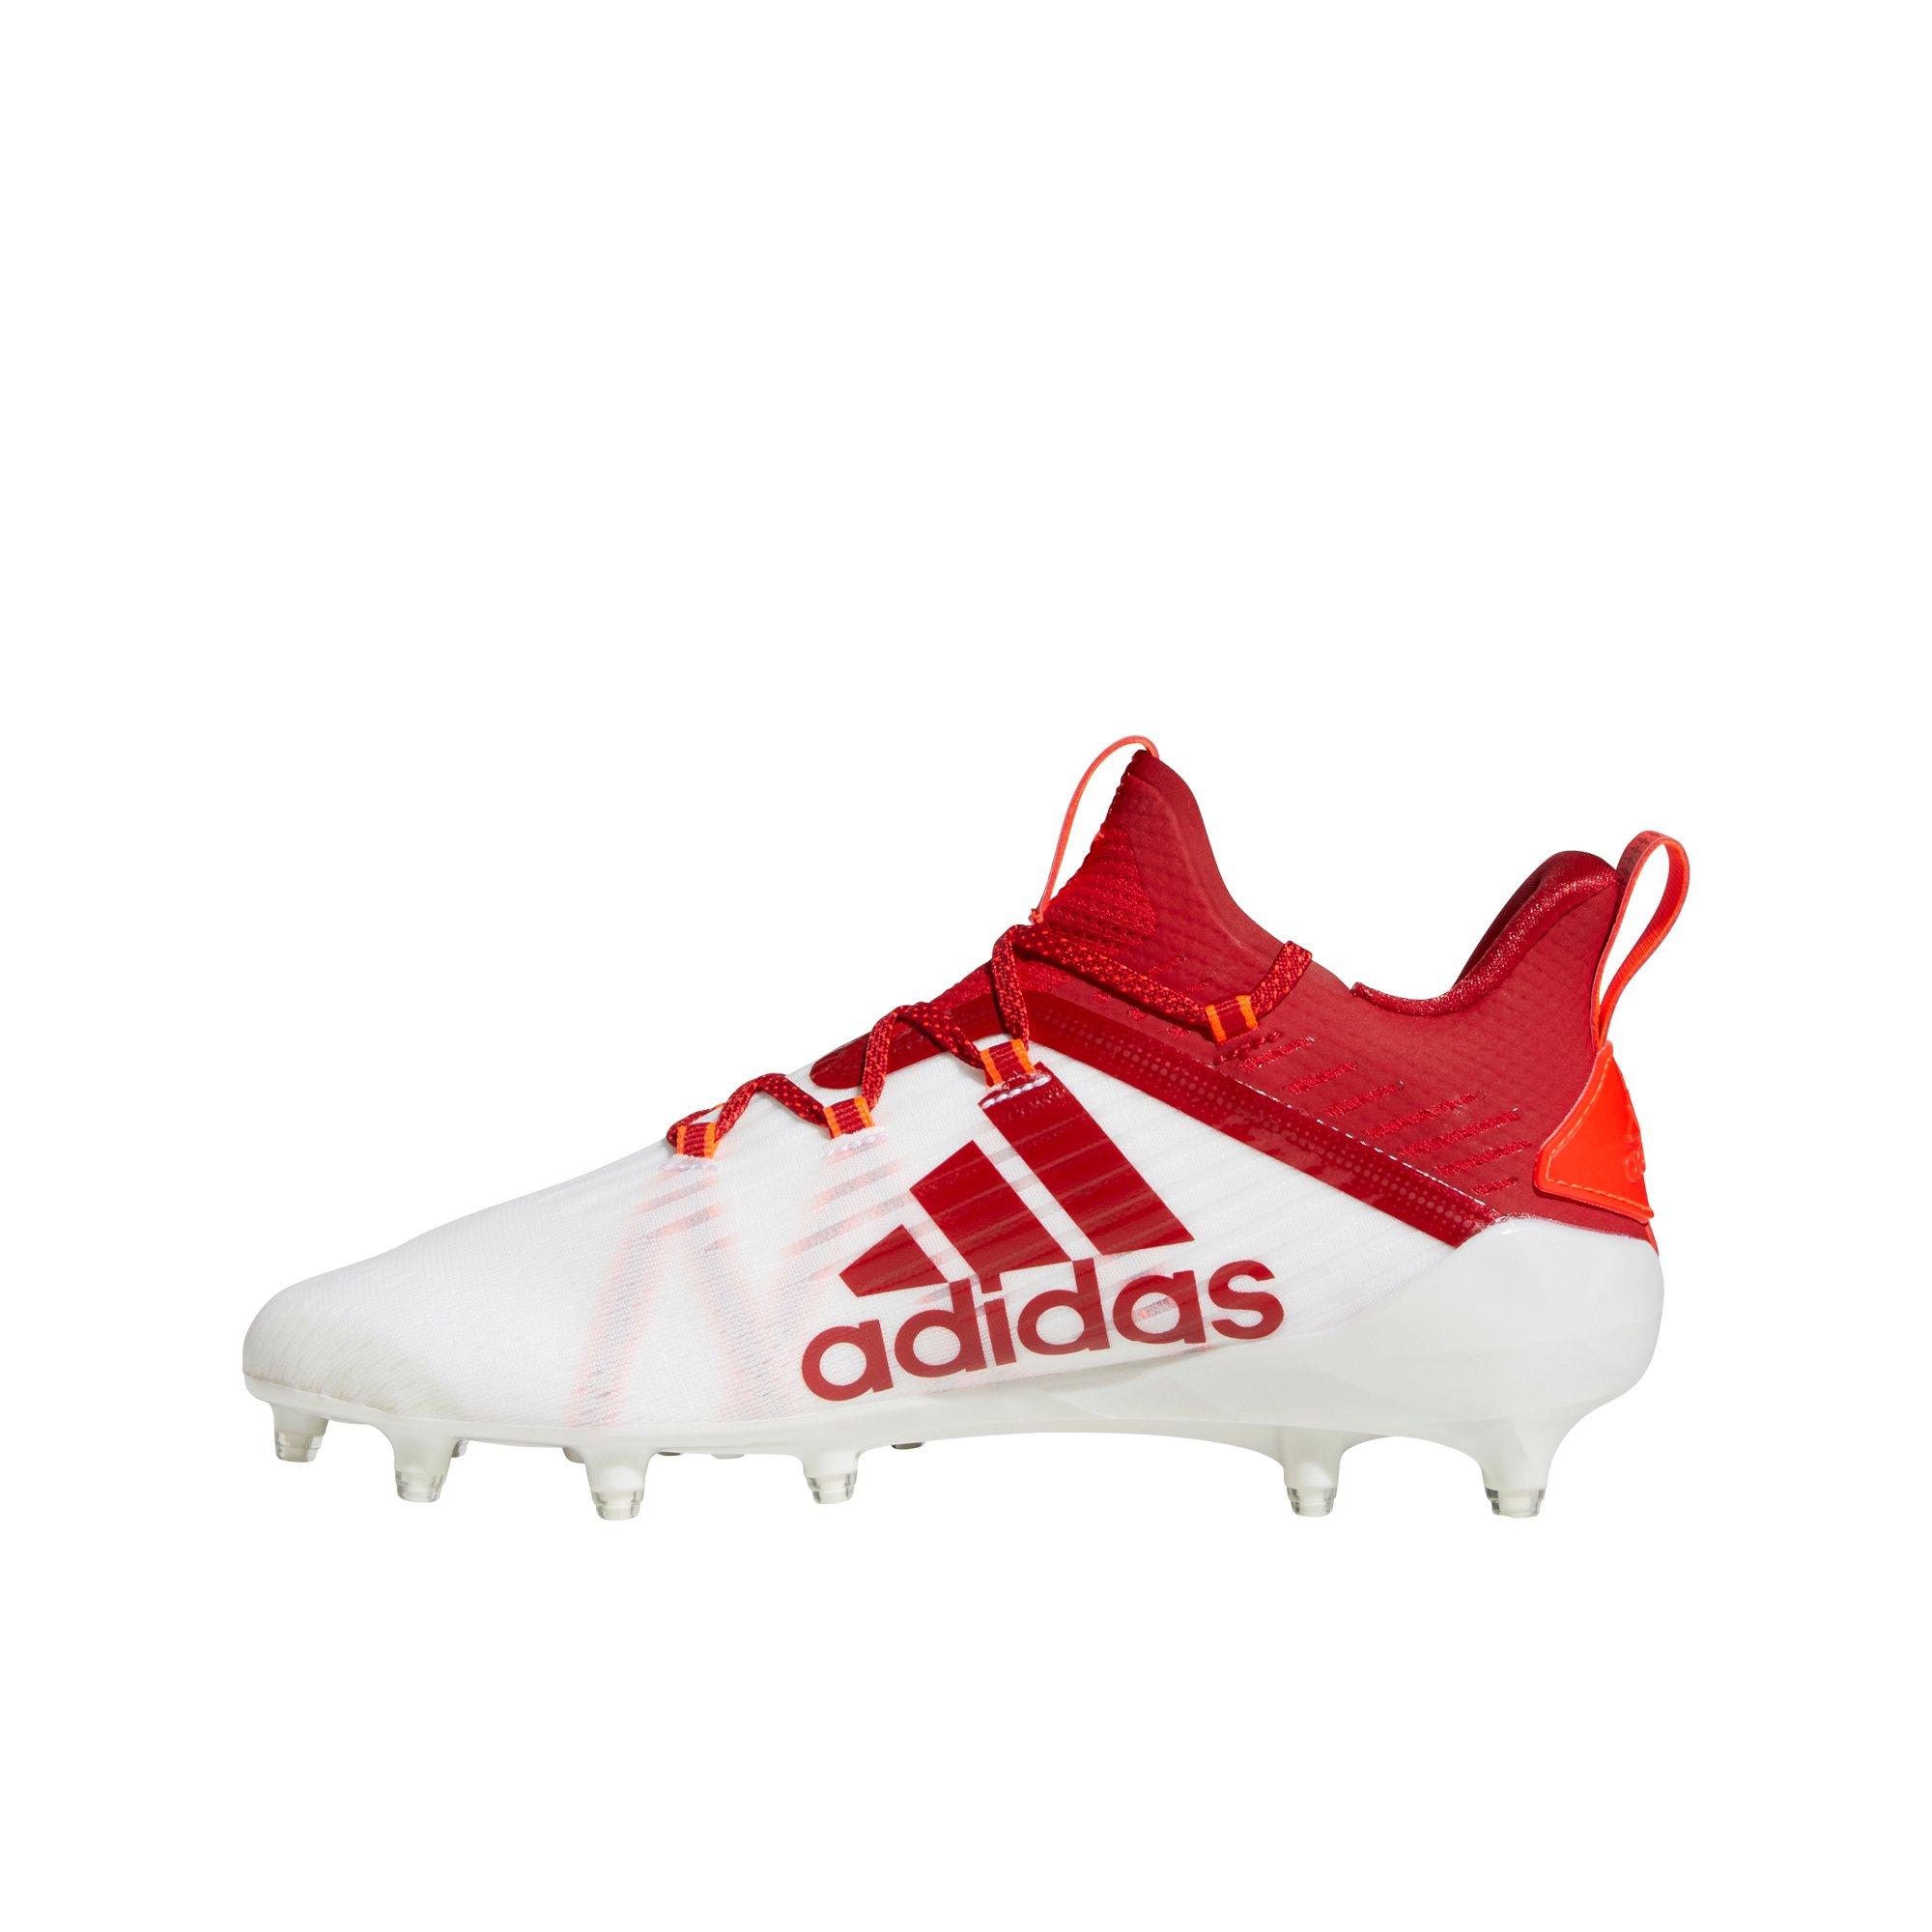 adidas red football cleats